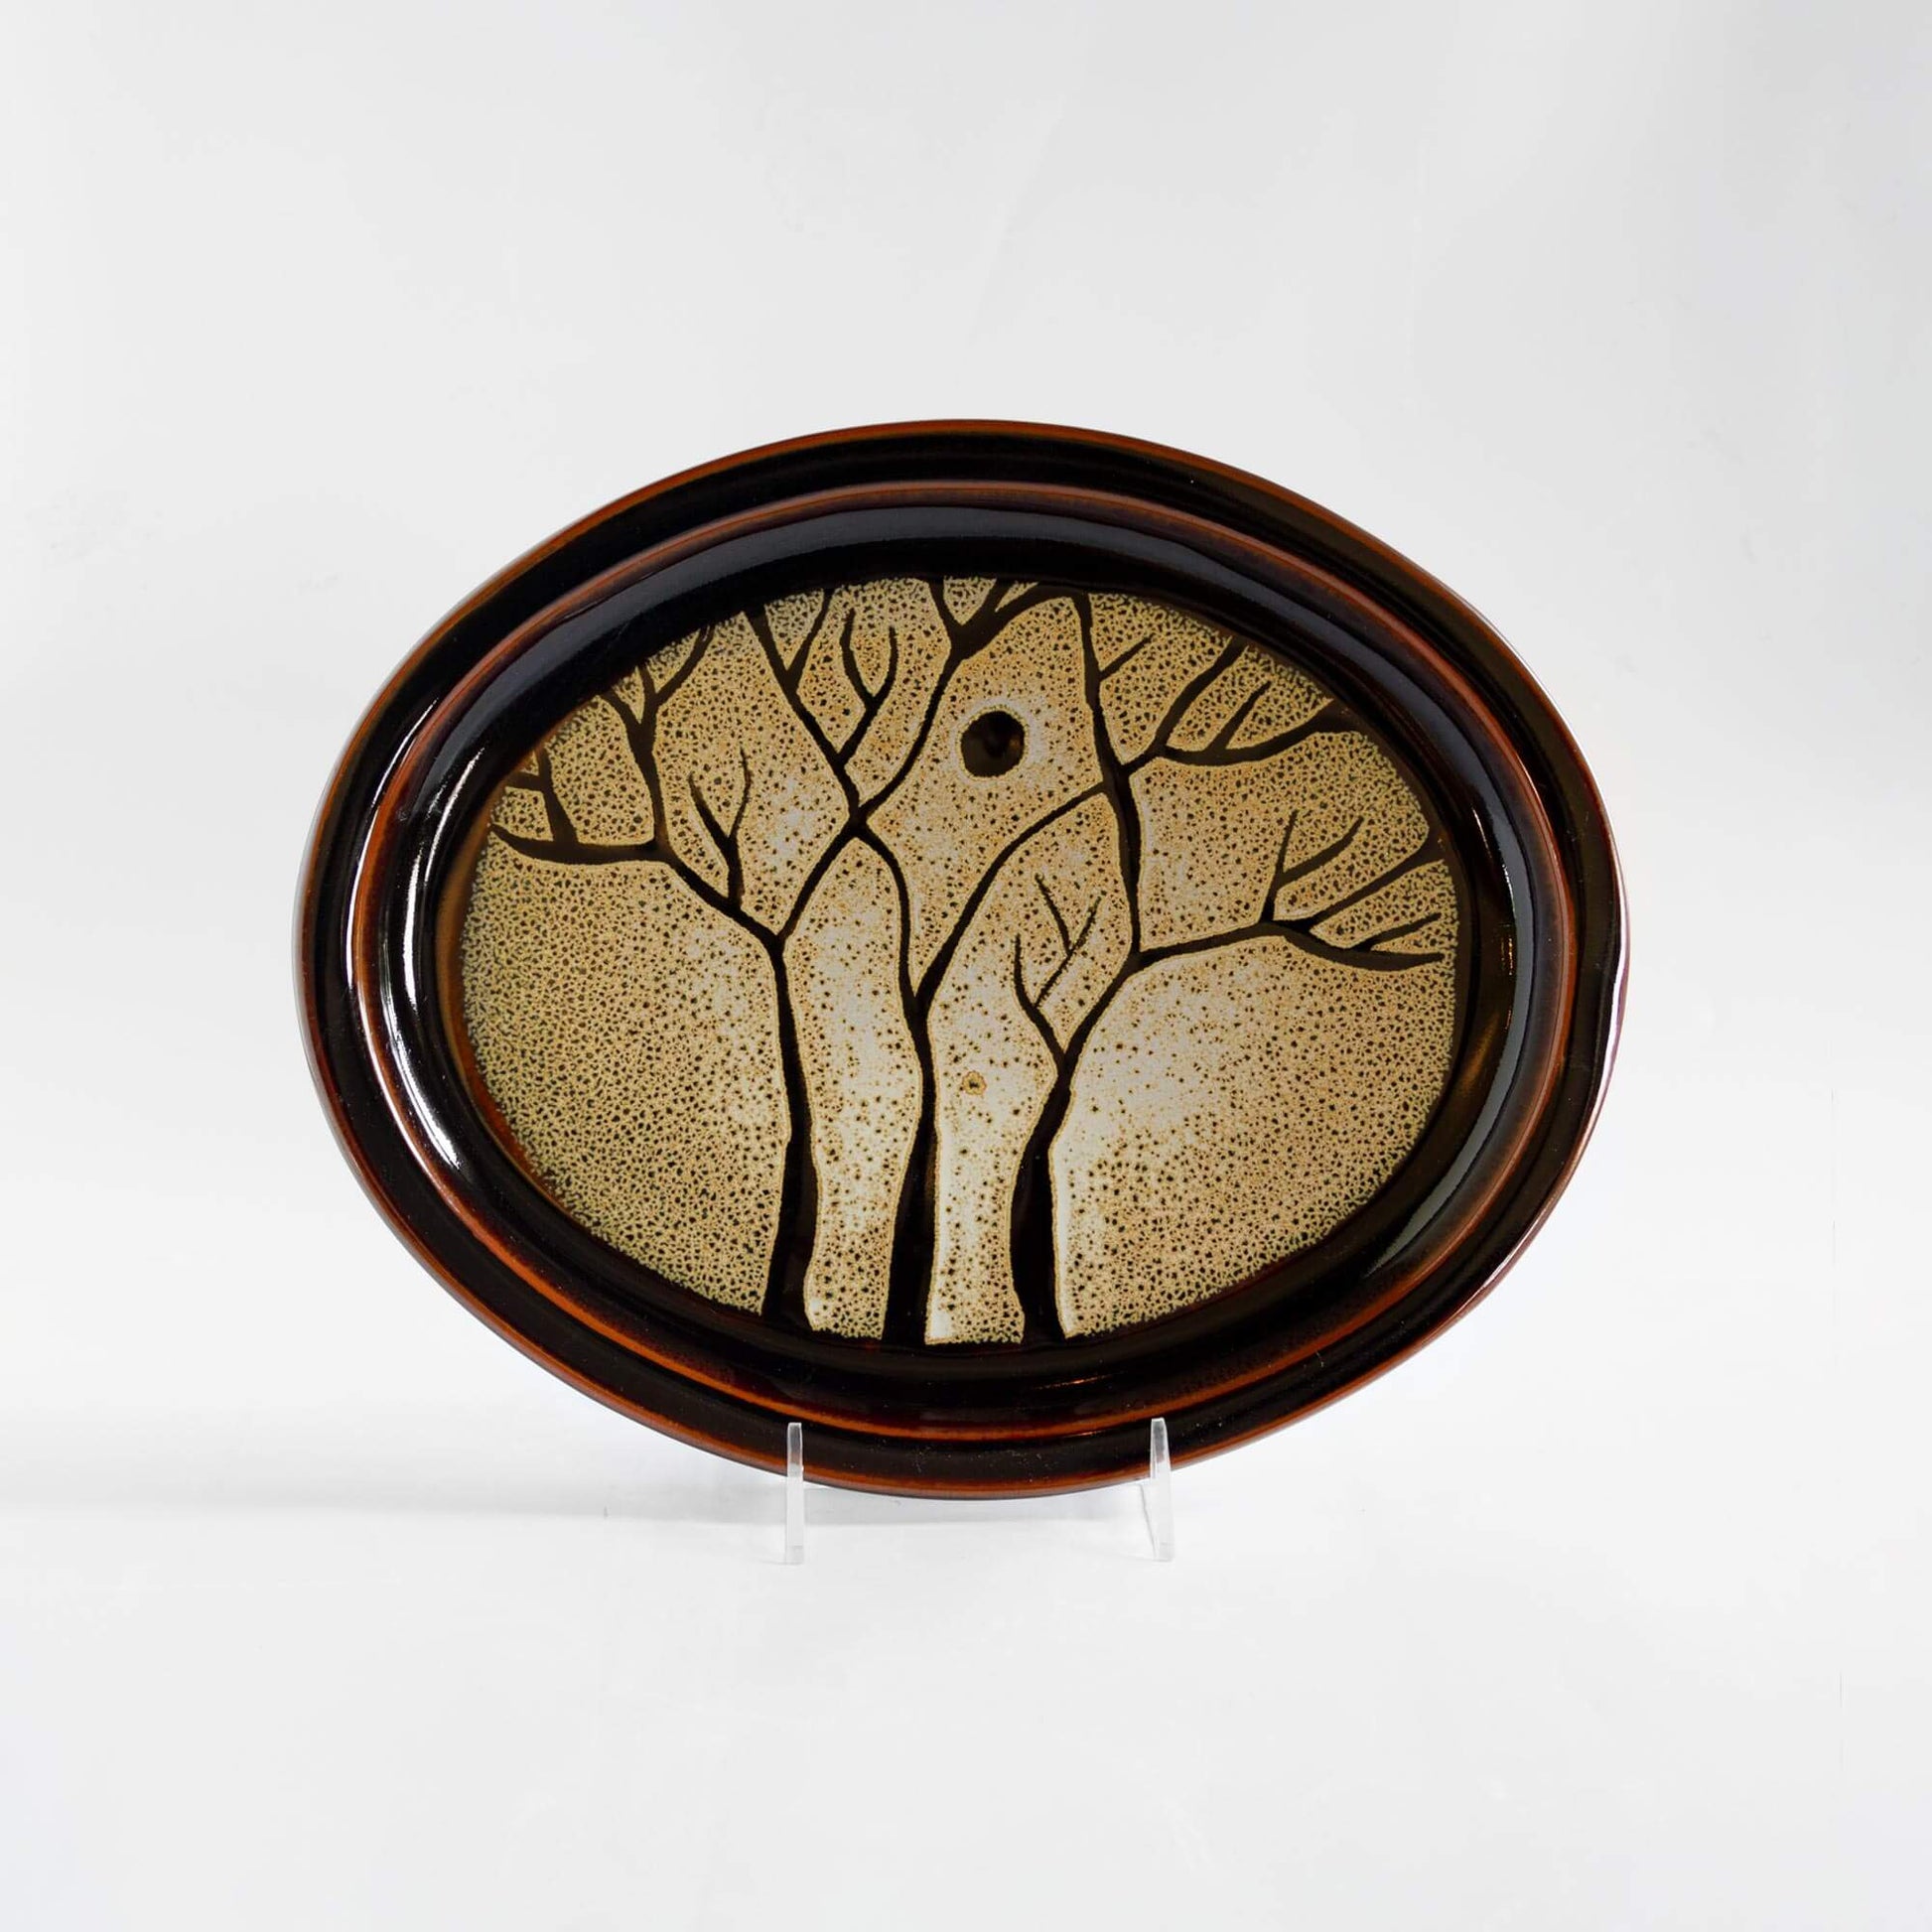 Handmade Pottery Oval Platter in Hamada Tree pattern made by Georgetown Pottery in Maine